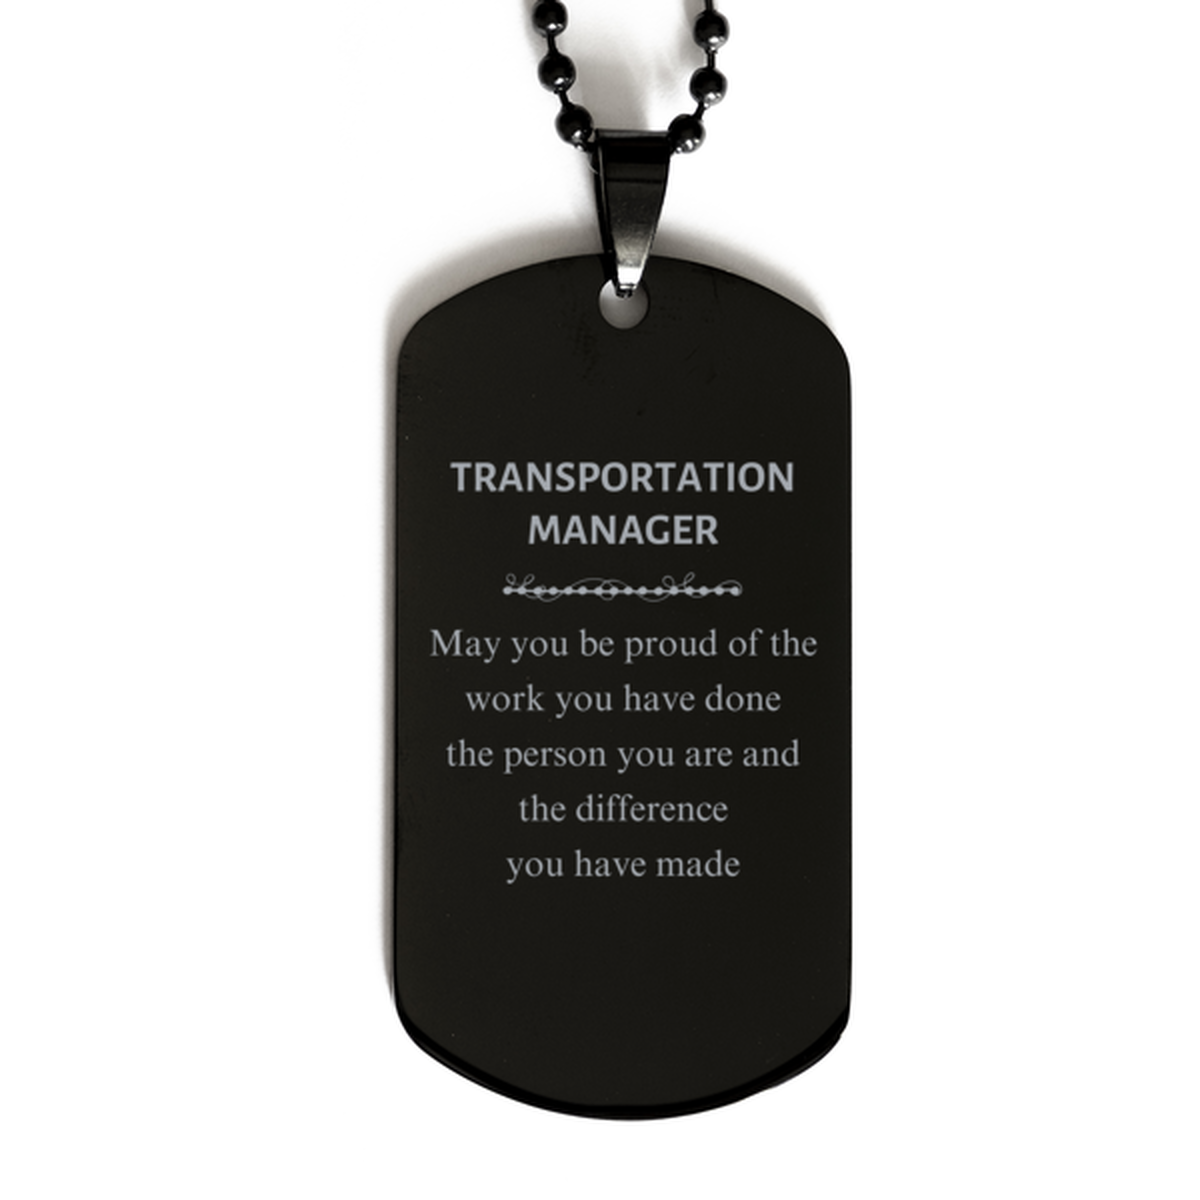 Transportation Manager May you be proud of the work you have done, Retirement Transportation Manager Black Dog Tag for Colleague Appreciation Gifts Amazing for Transportation Manager